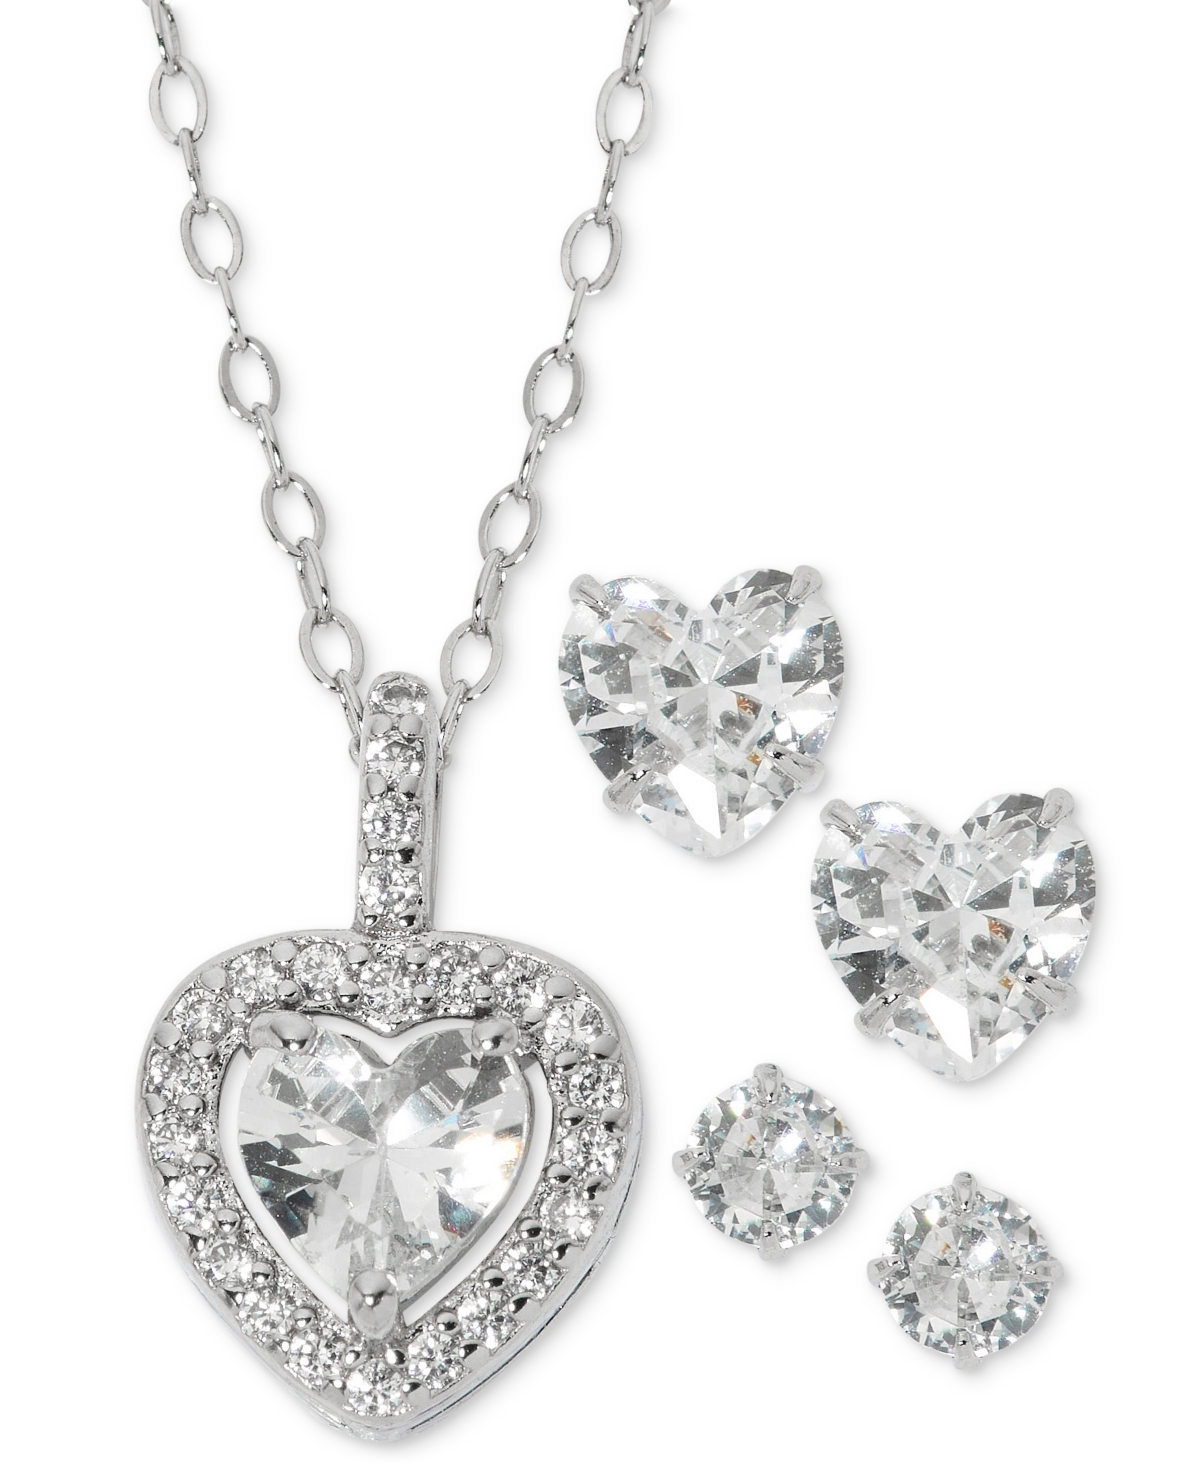 Giani Bernini 3-pc. Set Cubic Zirconia Heart Halo Pendant Necklace & Two Pair Solitaire Stud Earrings In Sterling In Silver